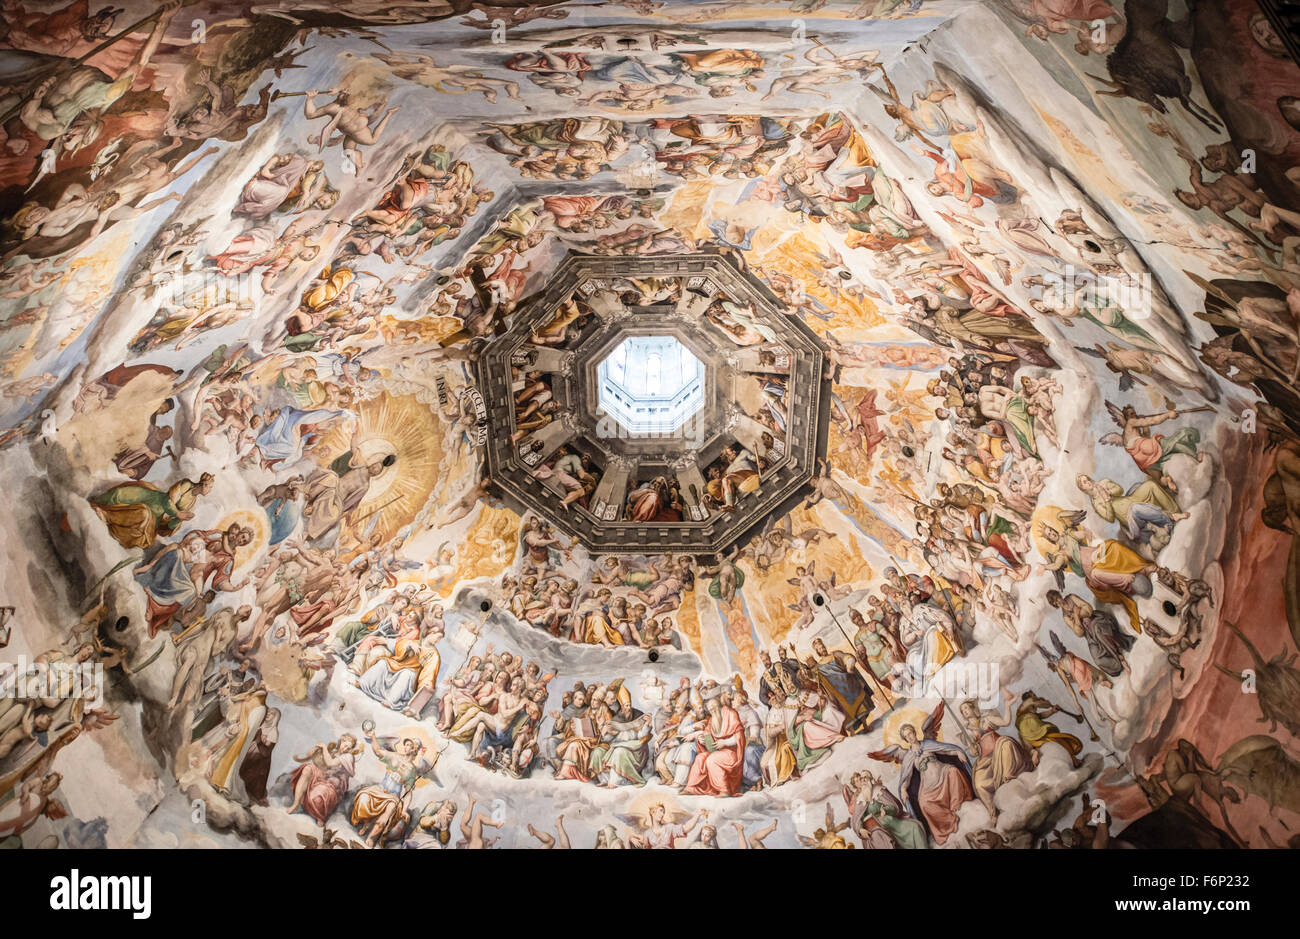 The Last Judgement Painting On The Ceiling Of The Duomo